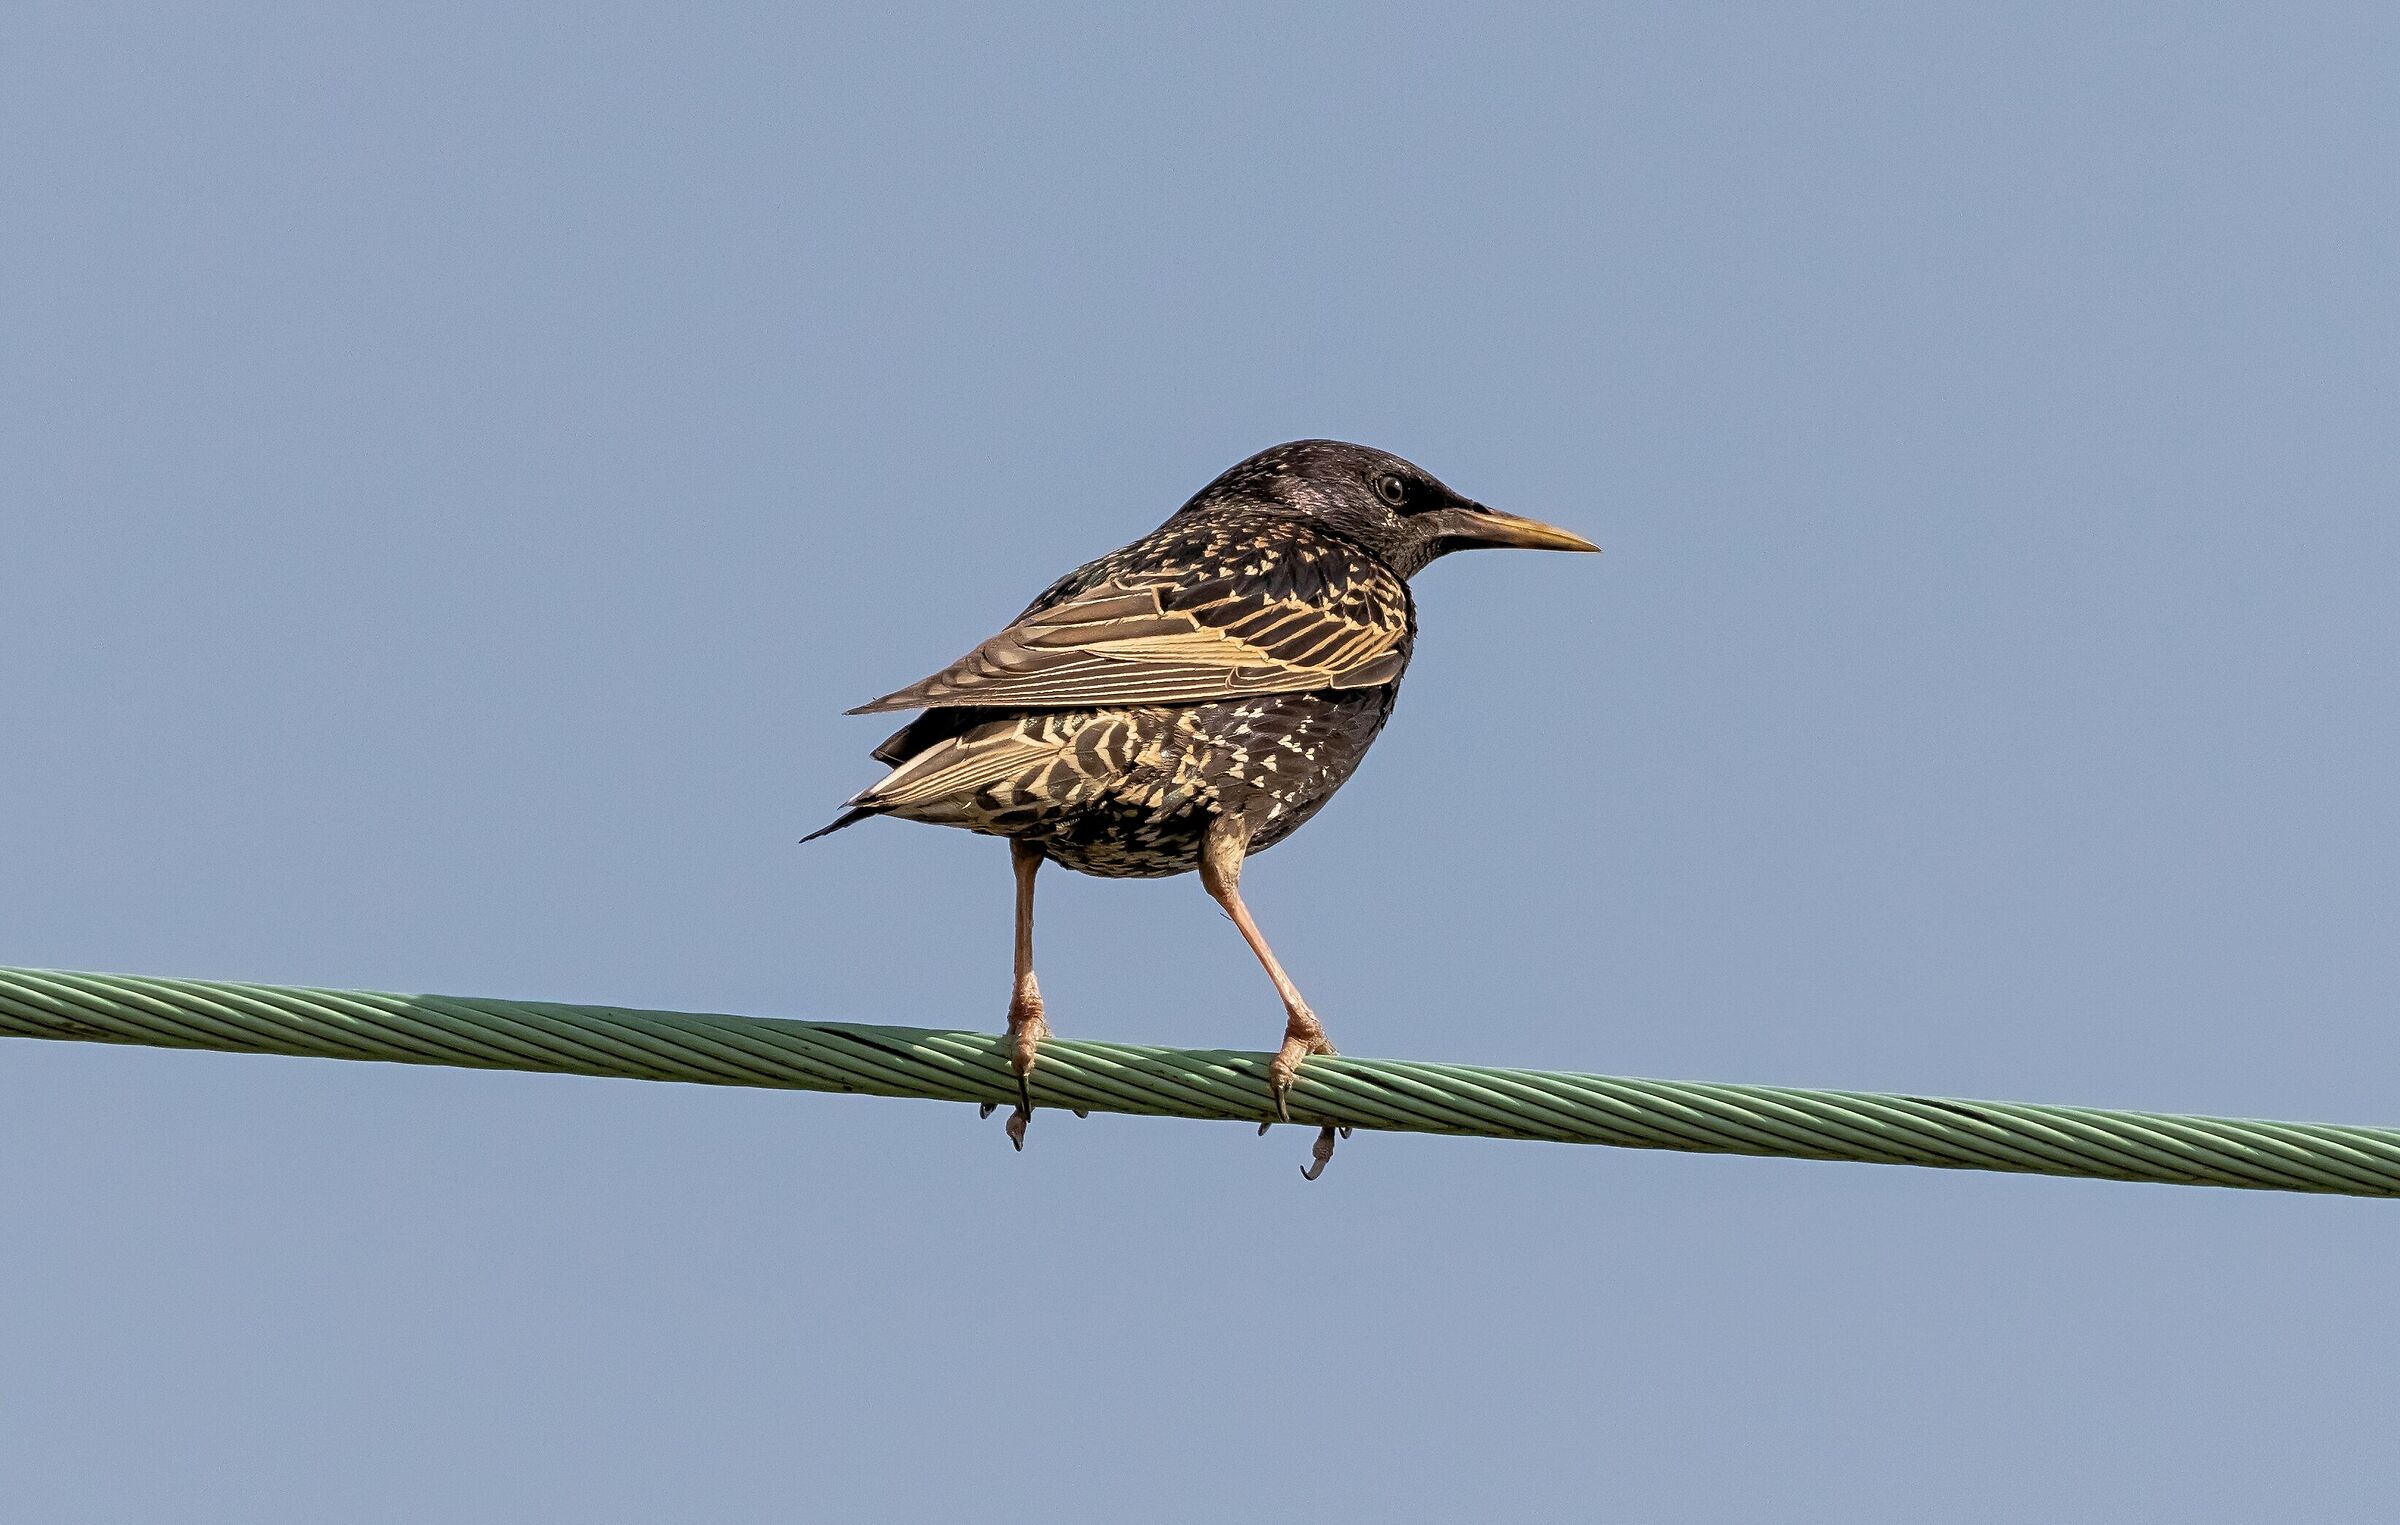 Male starling on electric cable 21/06/2021...